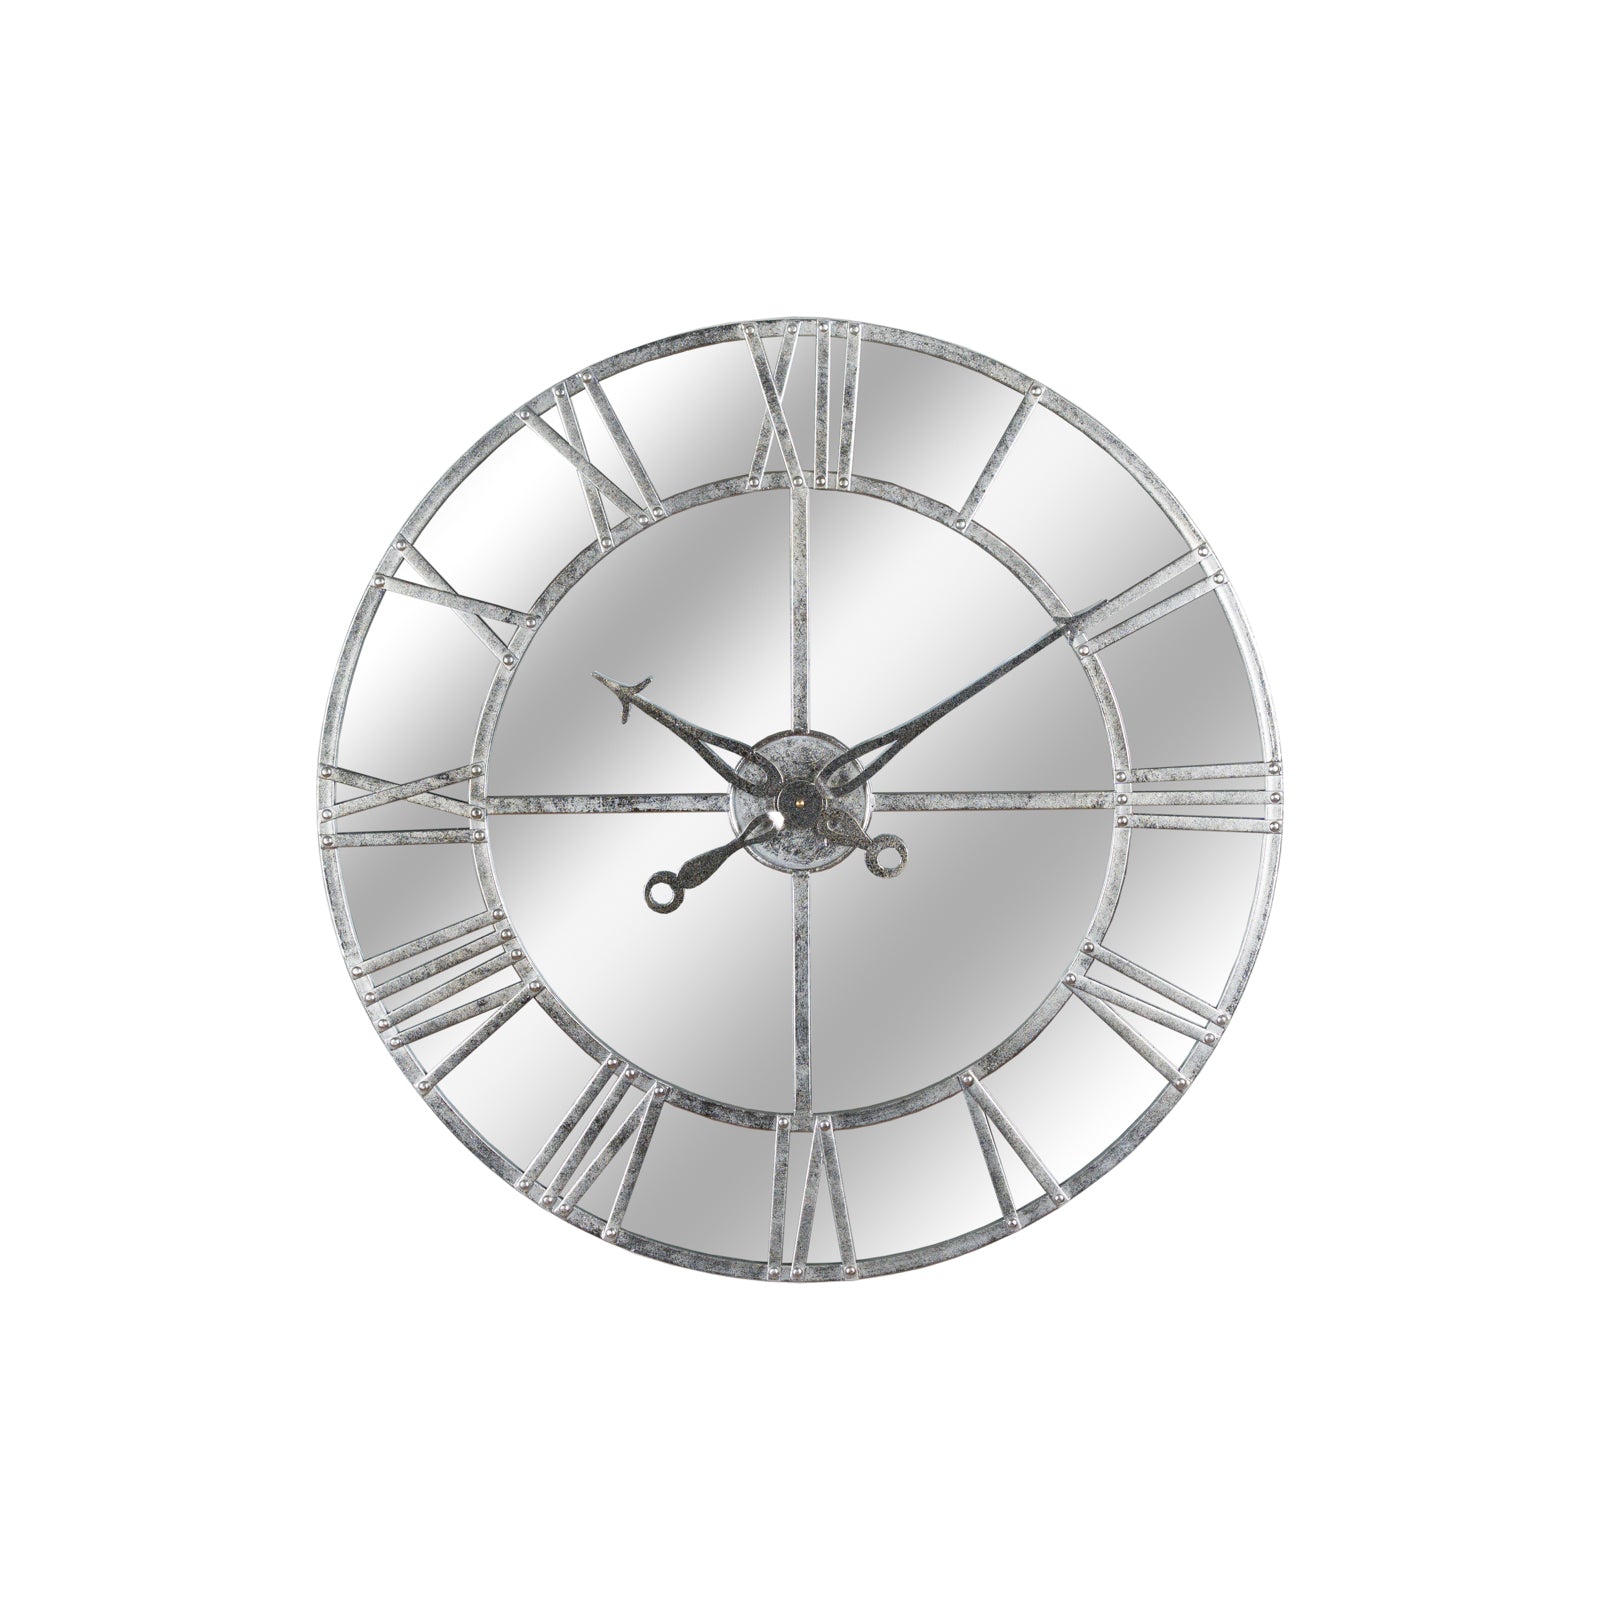 Silver Foil Mirrored Wall Clock-product